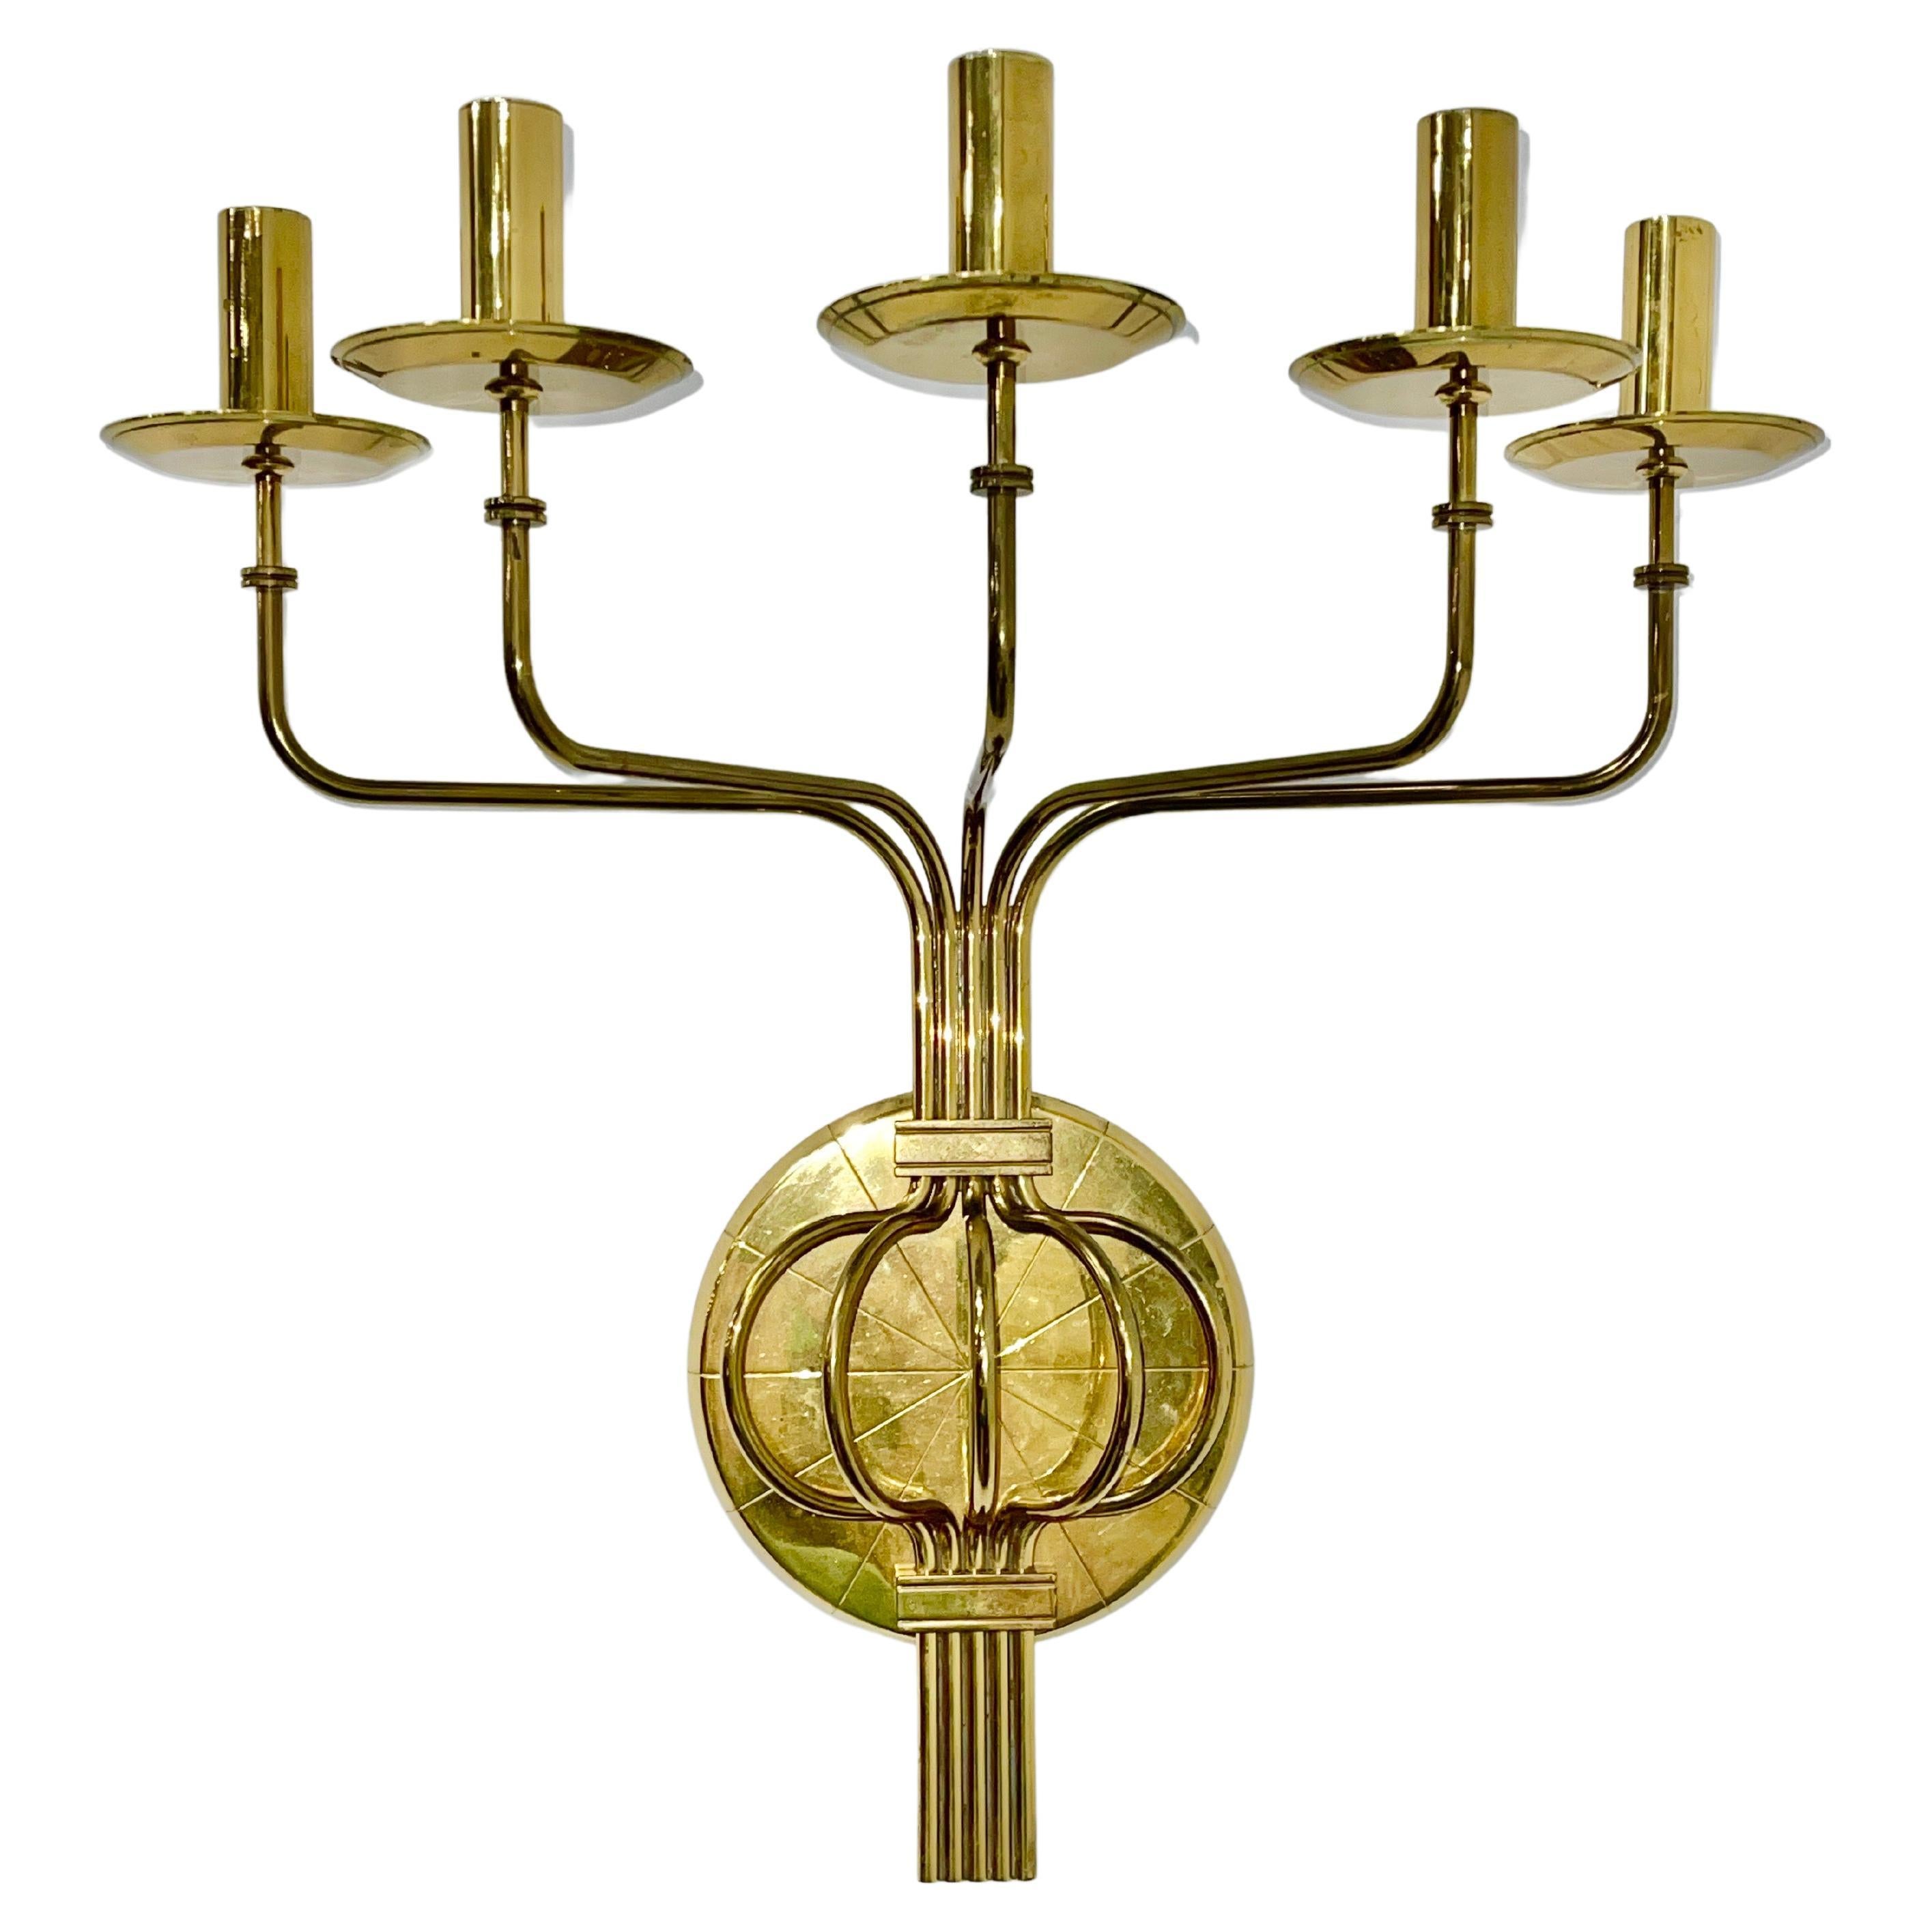 Pair of solid brass five arm candle sconces designed by Tommi Parzinger and produced by Dorlyn Silversmiths. 
No. 106 in the Dorlyn catalog.
Very heavy gauge solid brass.
Tubular brass candle holders removable for ease of cleaning.
Backplate 7.5